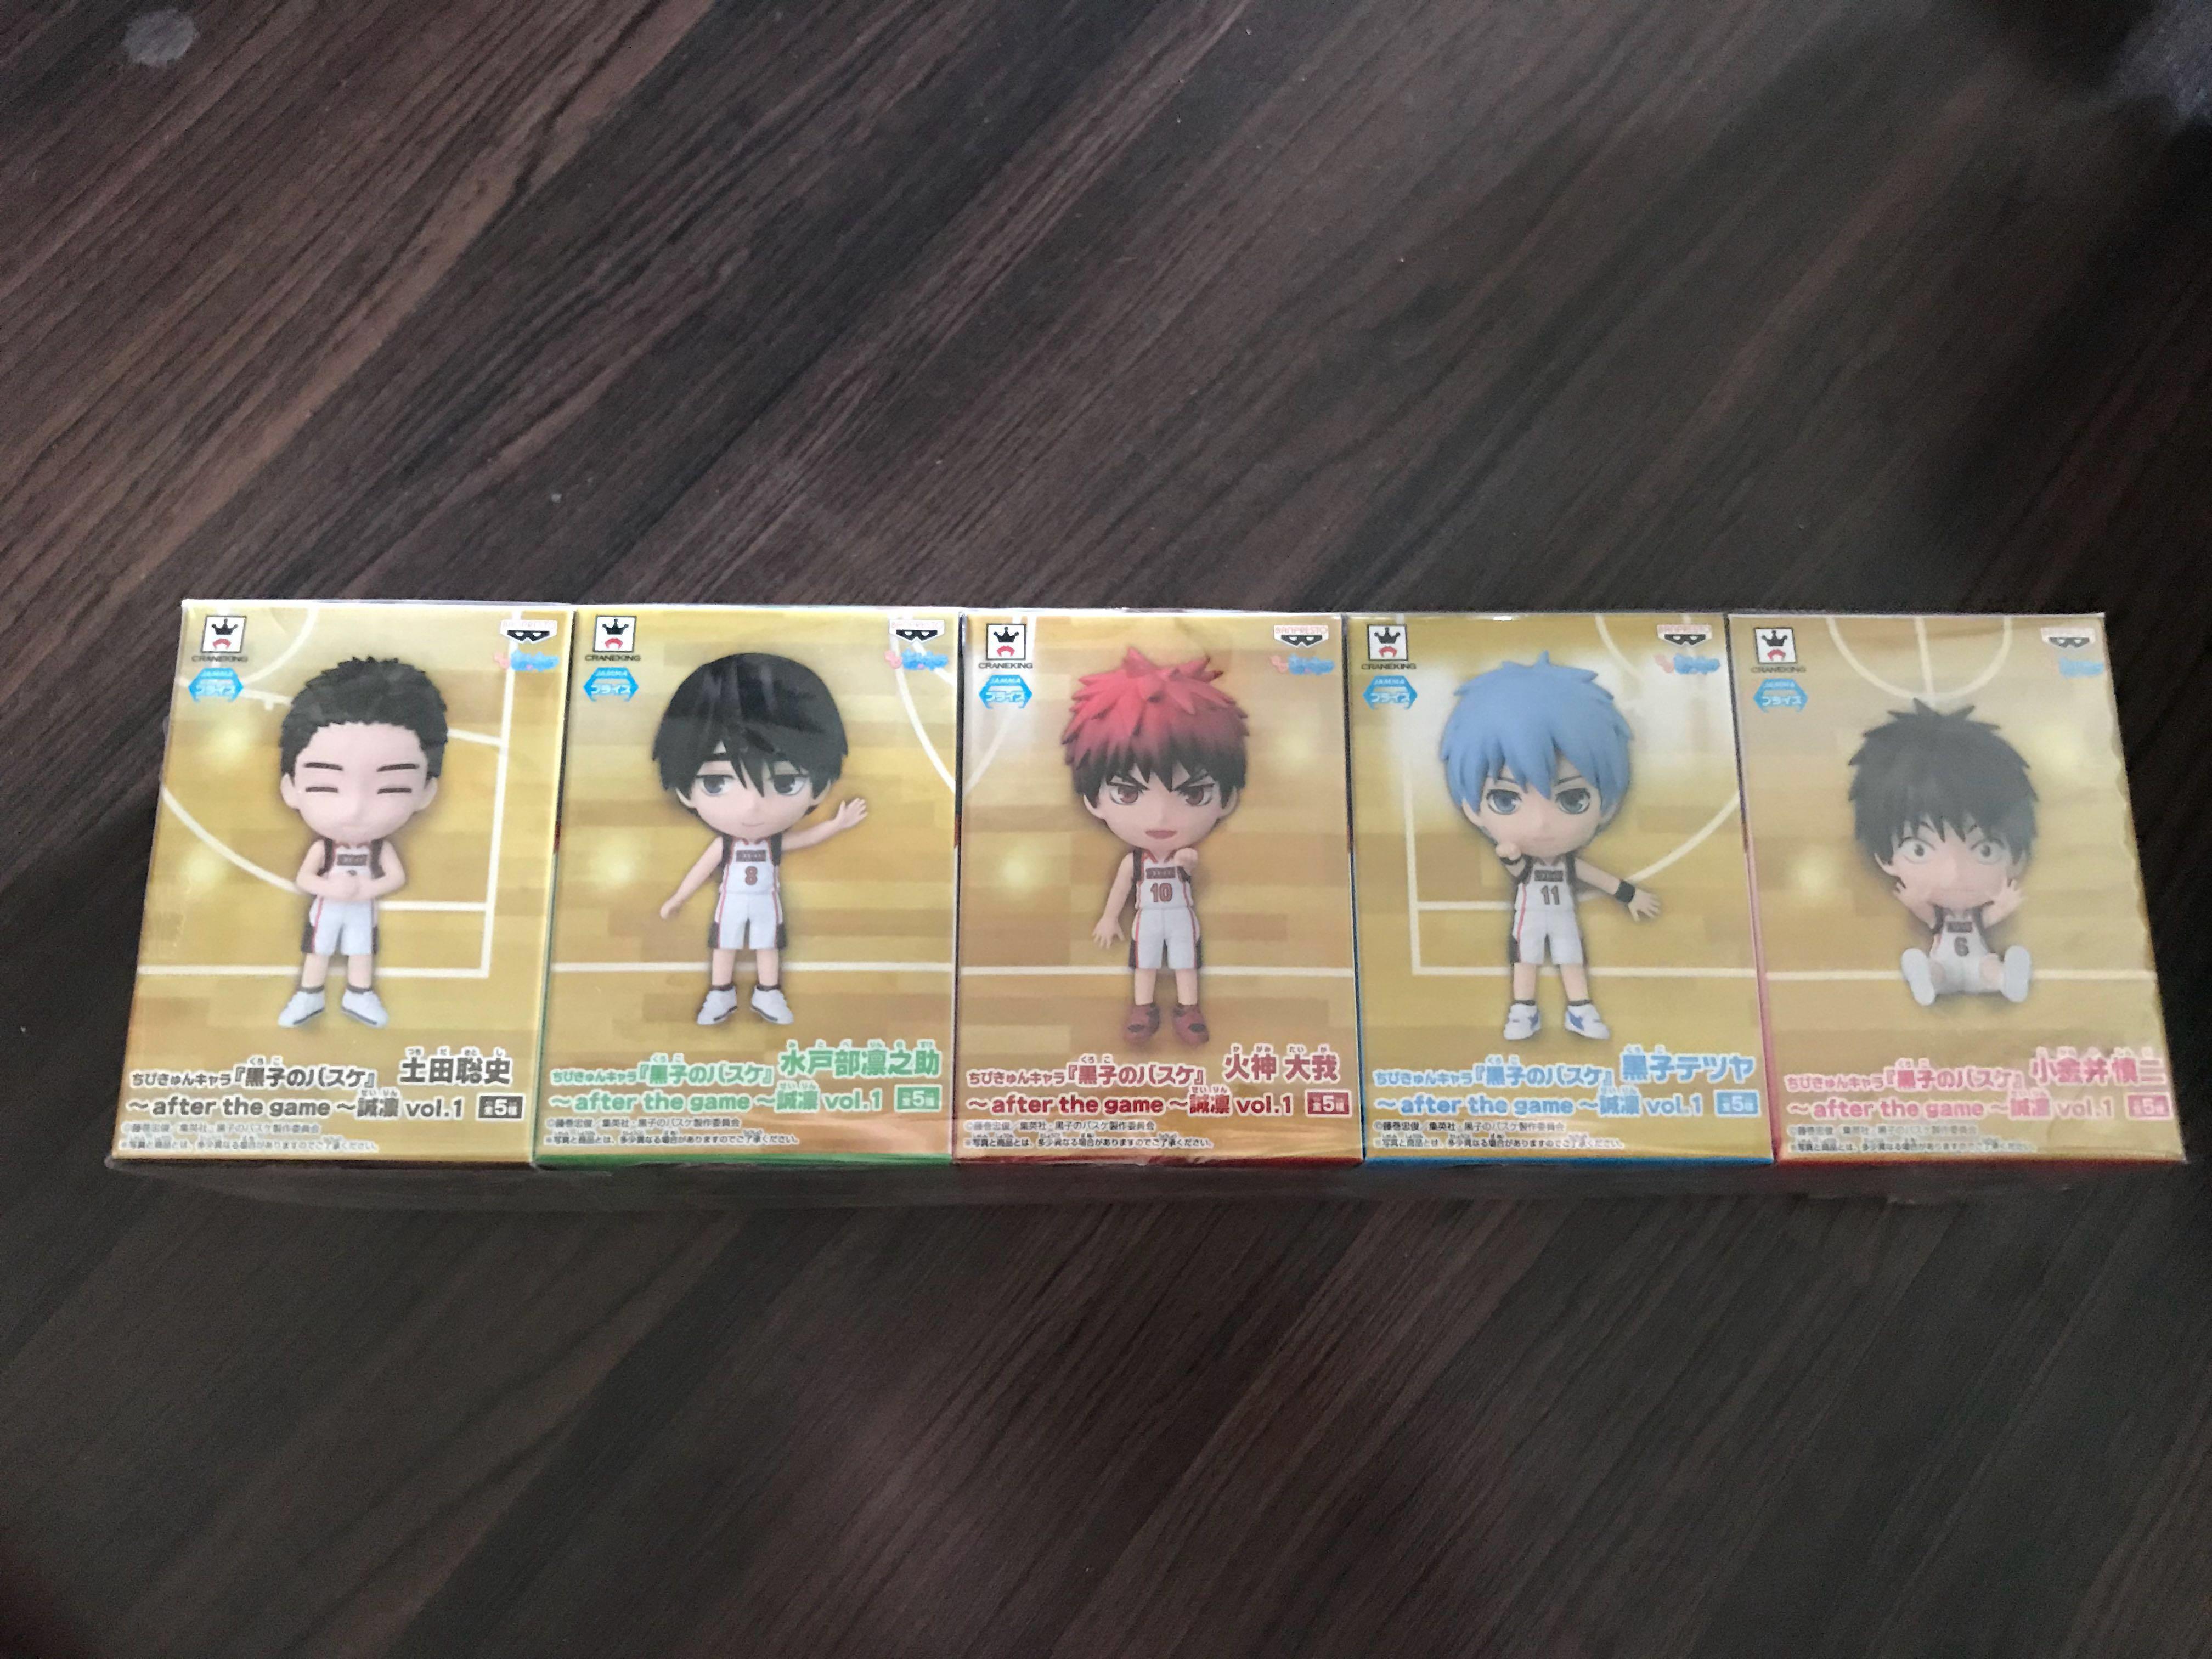 Chibi Kyun Characters Of Kuroko No Basuke After The Game Hobbies Toys Collectibles Memorabilia Fan Merchandise On Carousell